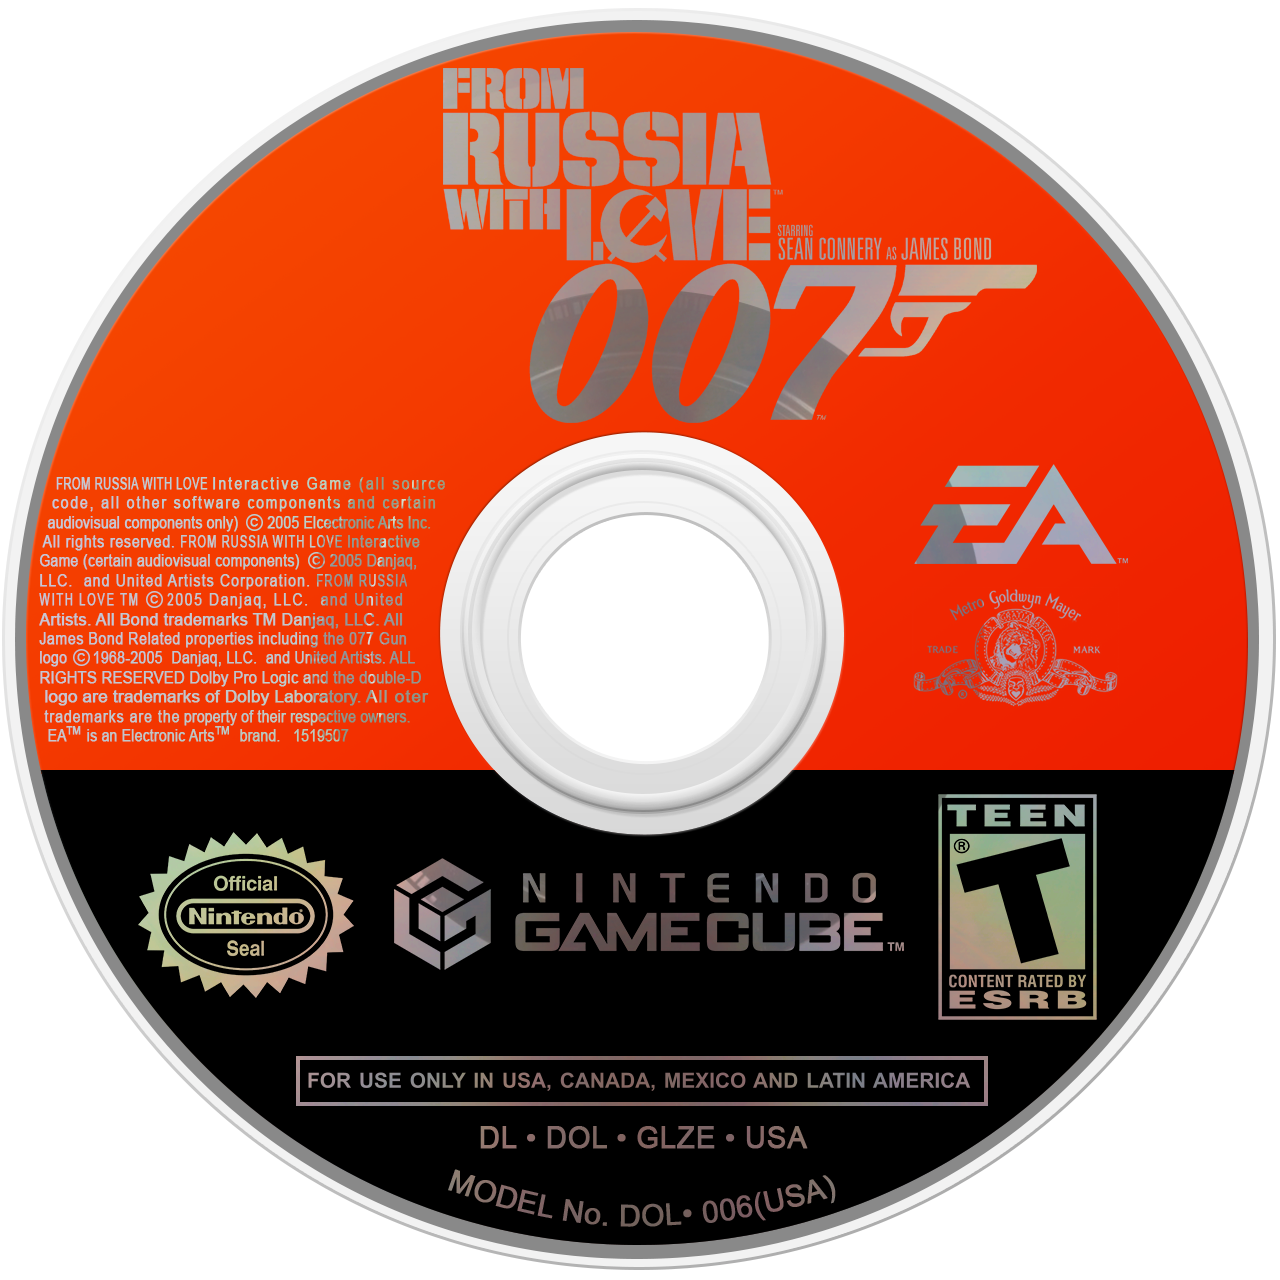 007: From Russia with Love - Nintendo GameCube Game